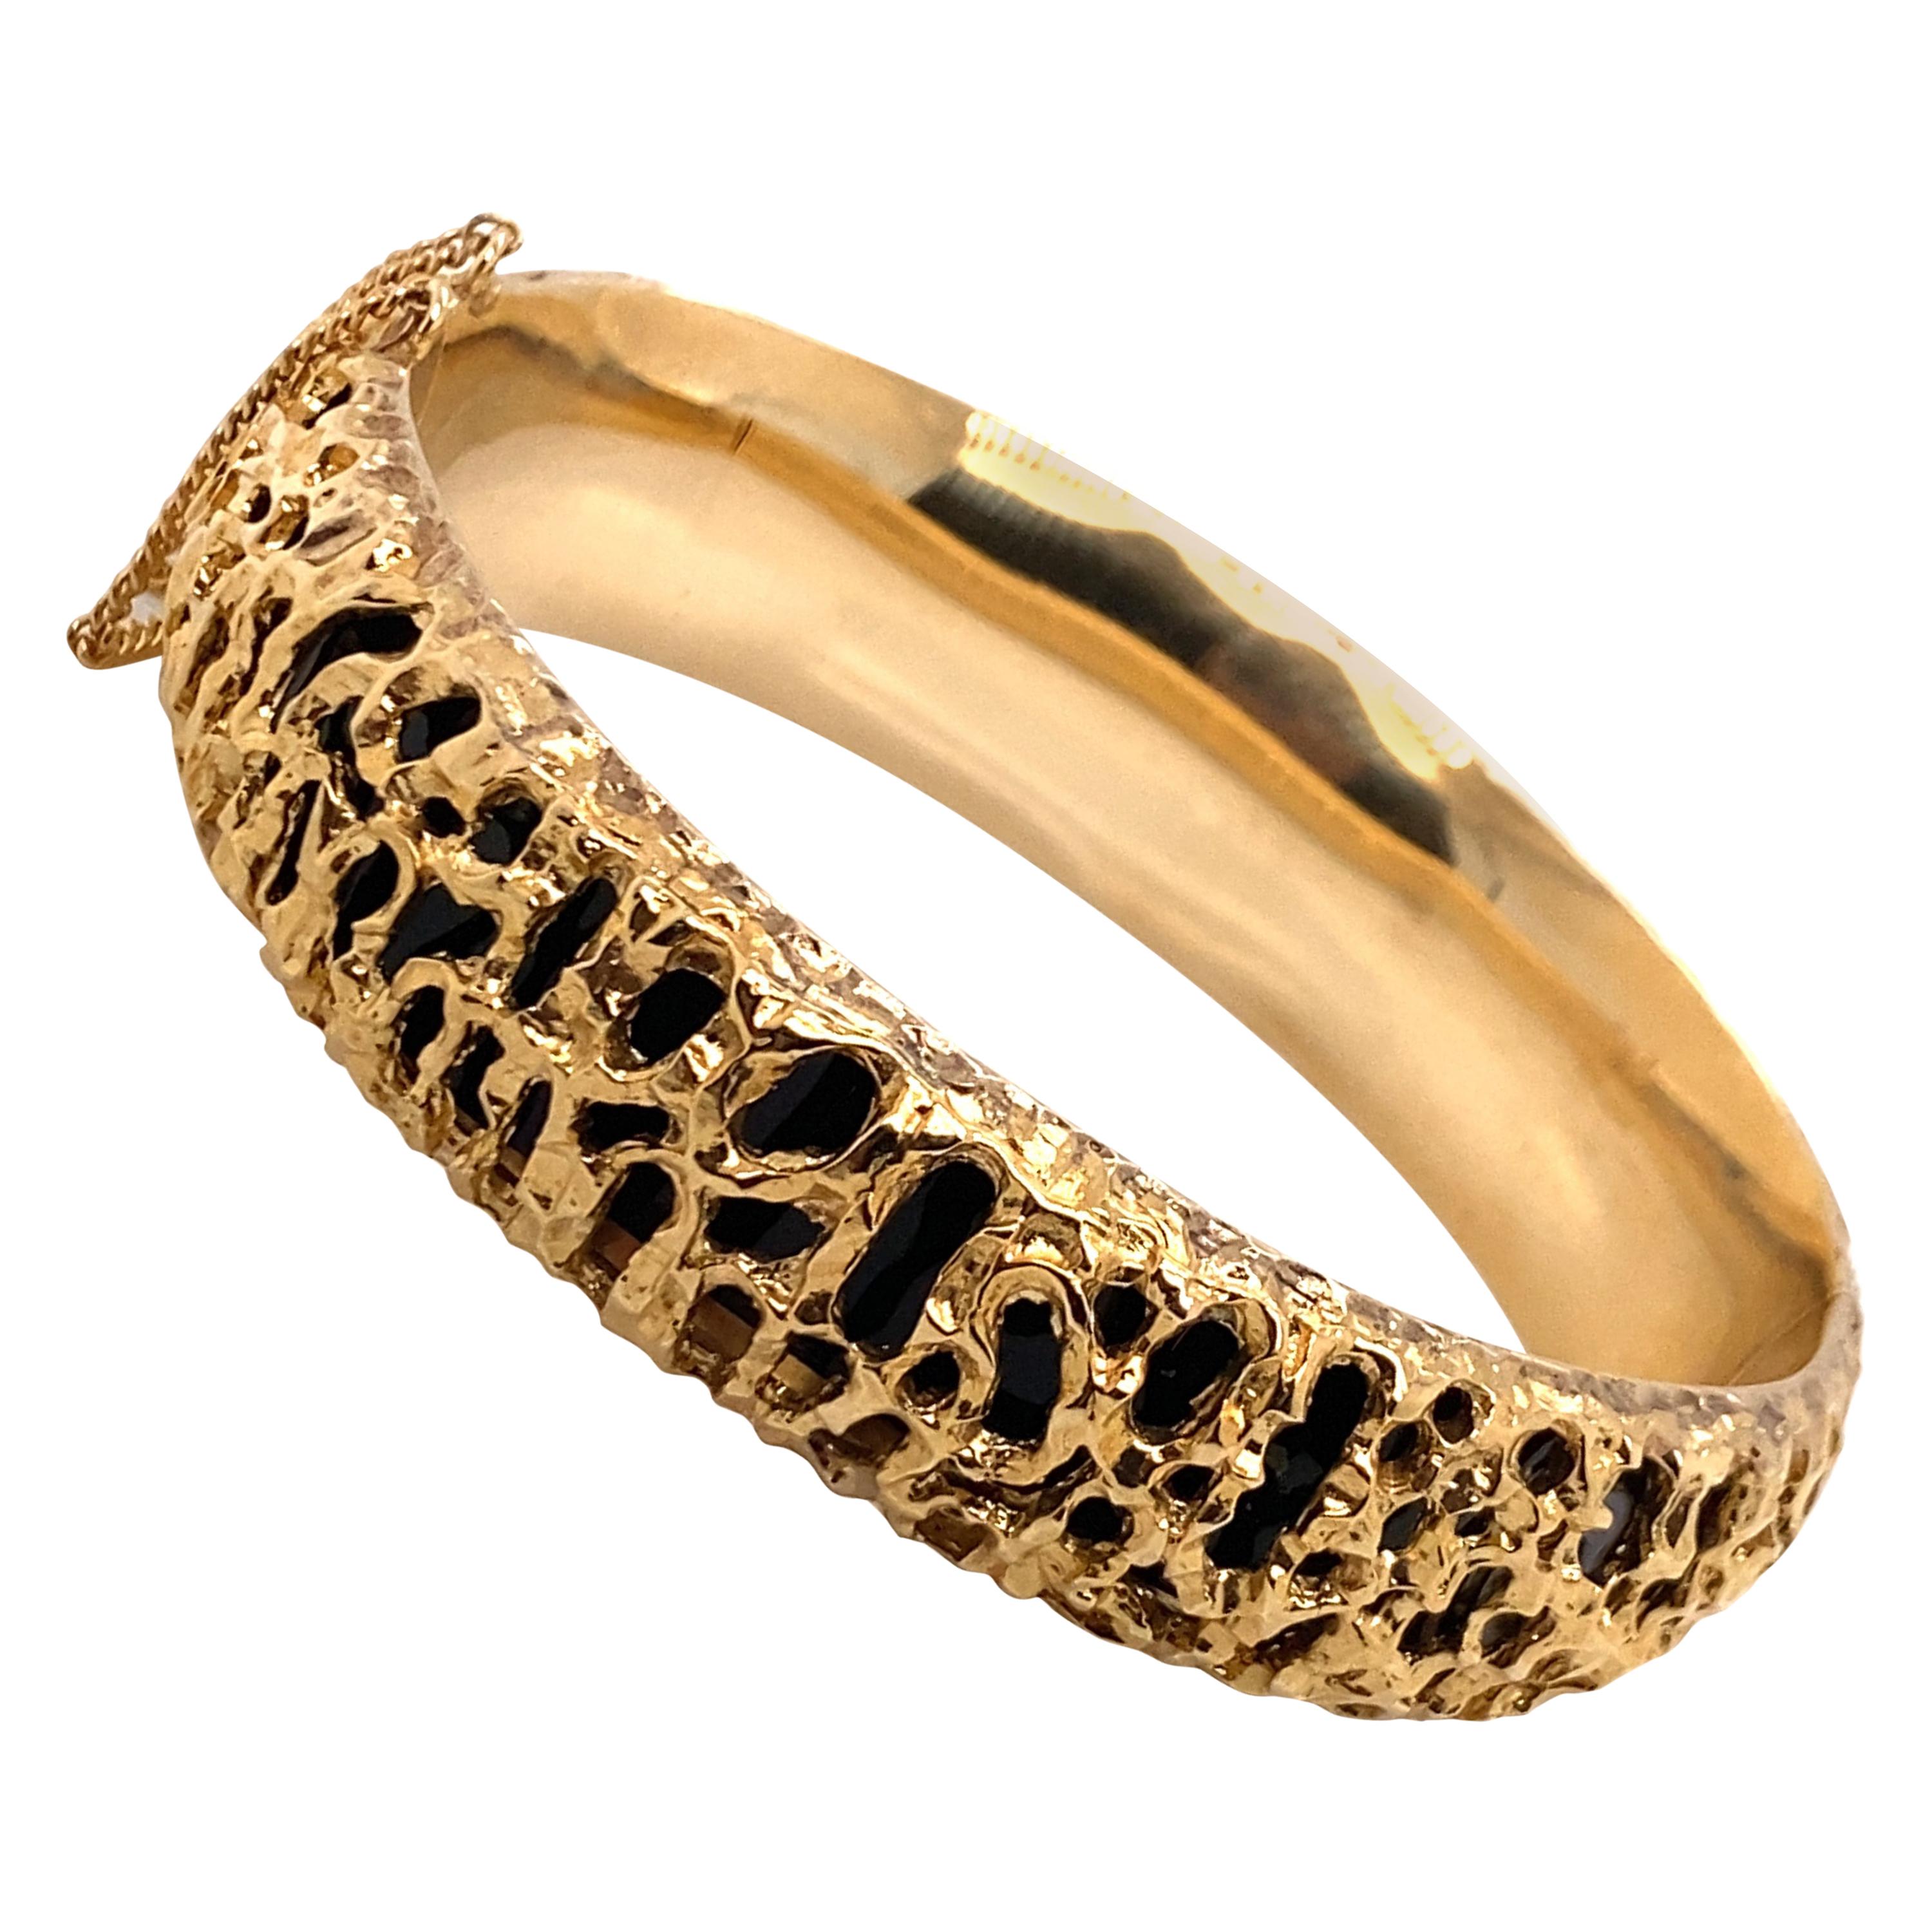 Vintage 1980's 14K Yellow Gold Bangle Bracelet with Filigree and Onyx For Sale